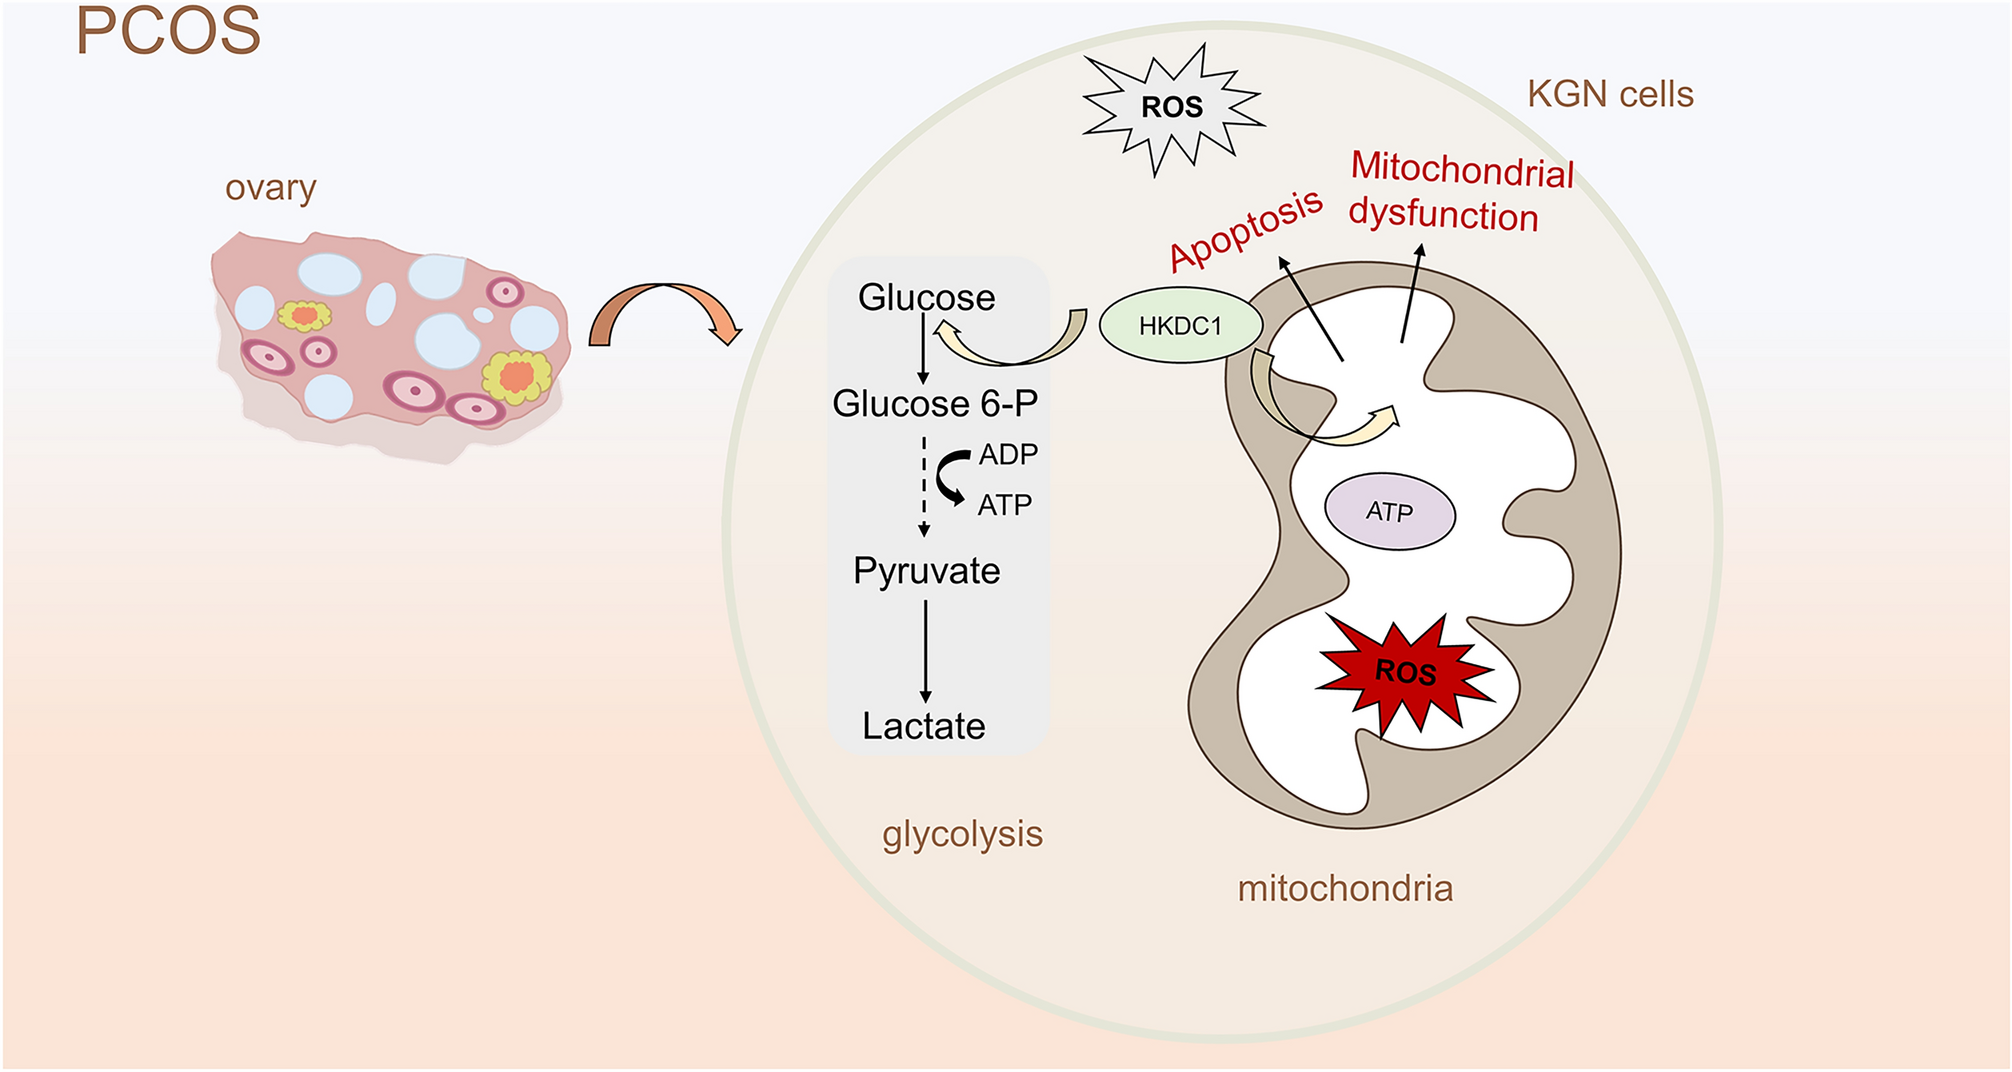 New insights into the treatment of polycystic ovary syndrome: HKDC1 promotes the growth of ovarian granulocyte cells by regulating mitochondrial function and glycolysis